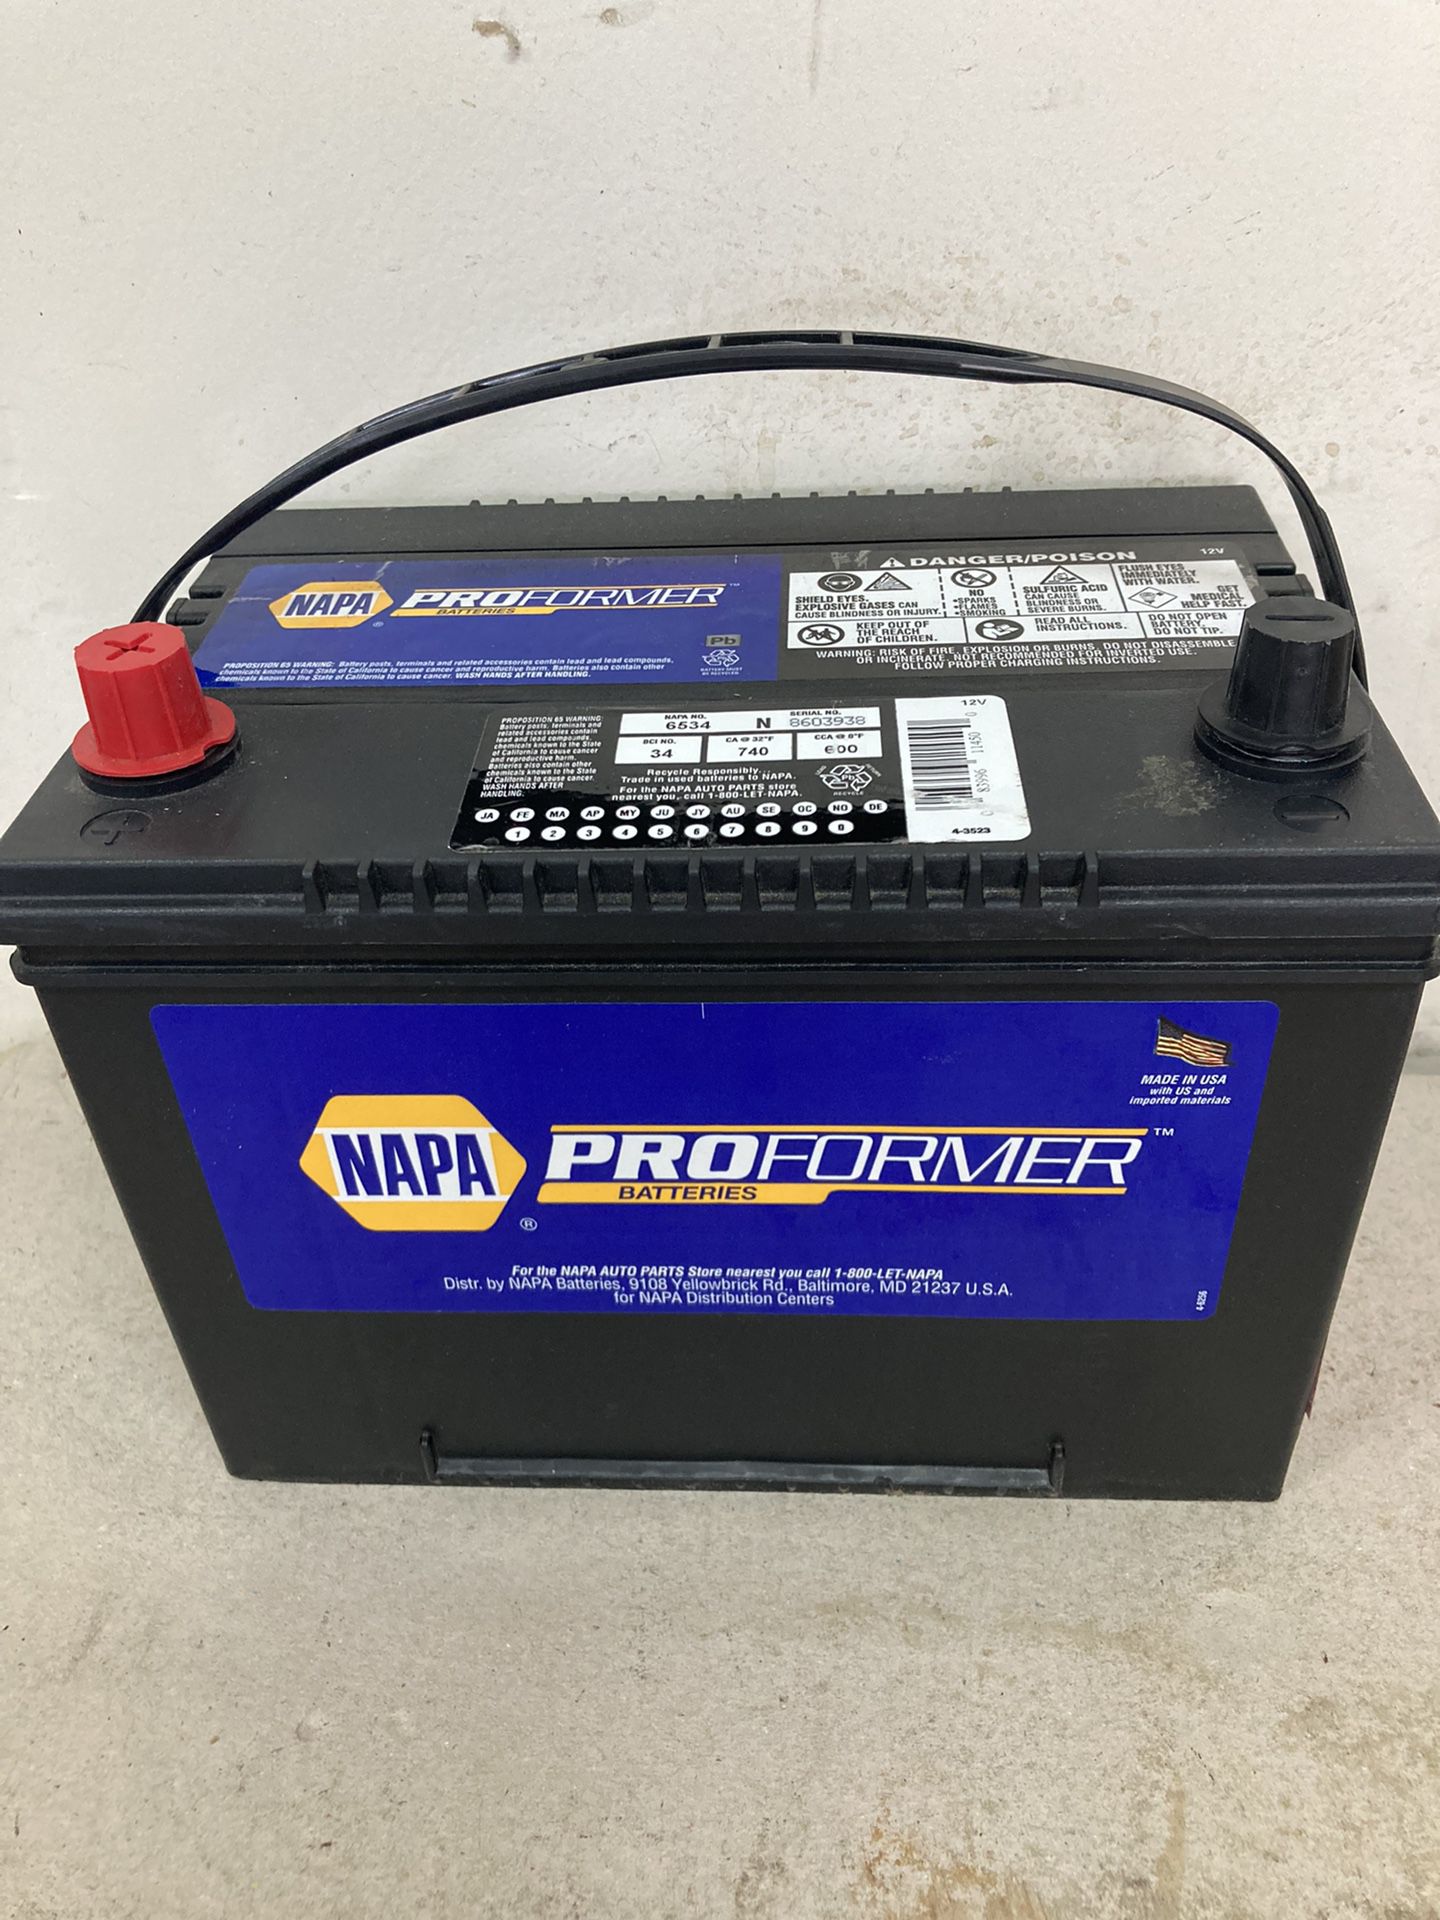 myg eksplosion feminin Car battery brand new NAPA pro power special edition size 34 for sale for  Sale in Los Angeles, CA - OfferUp